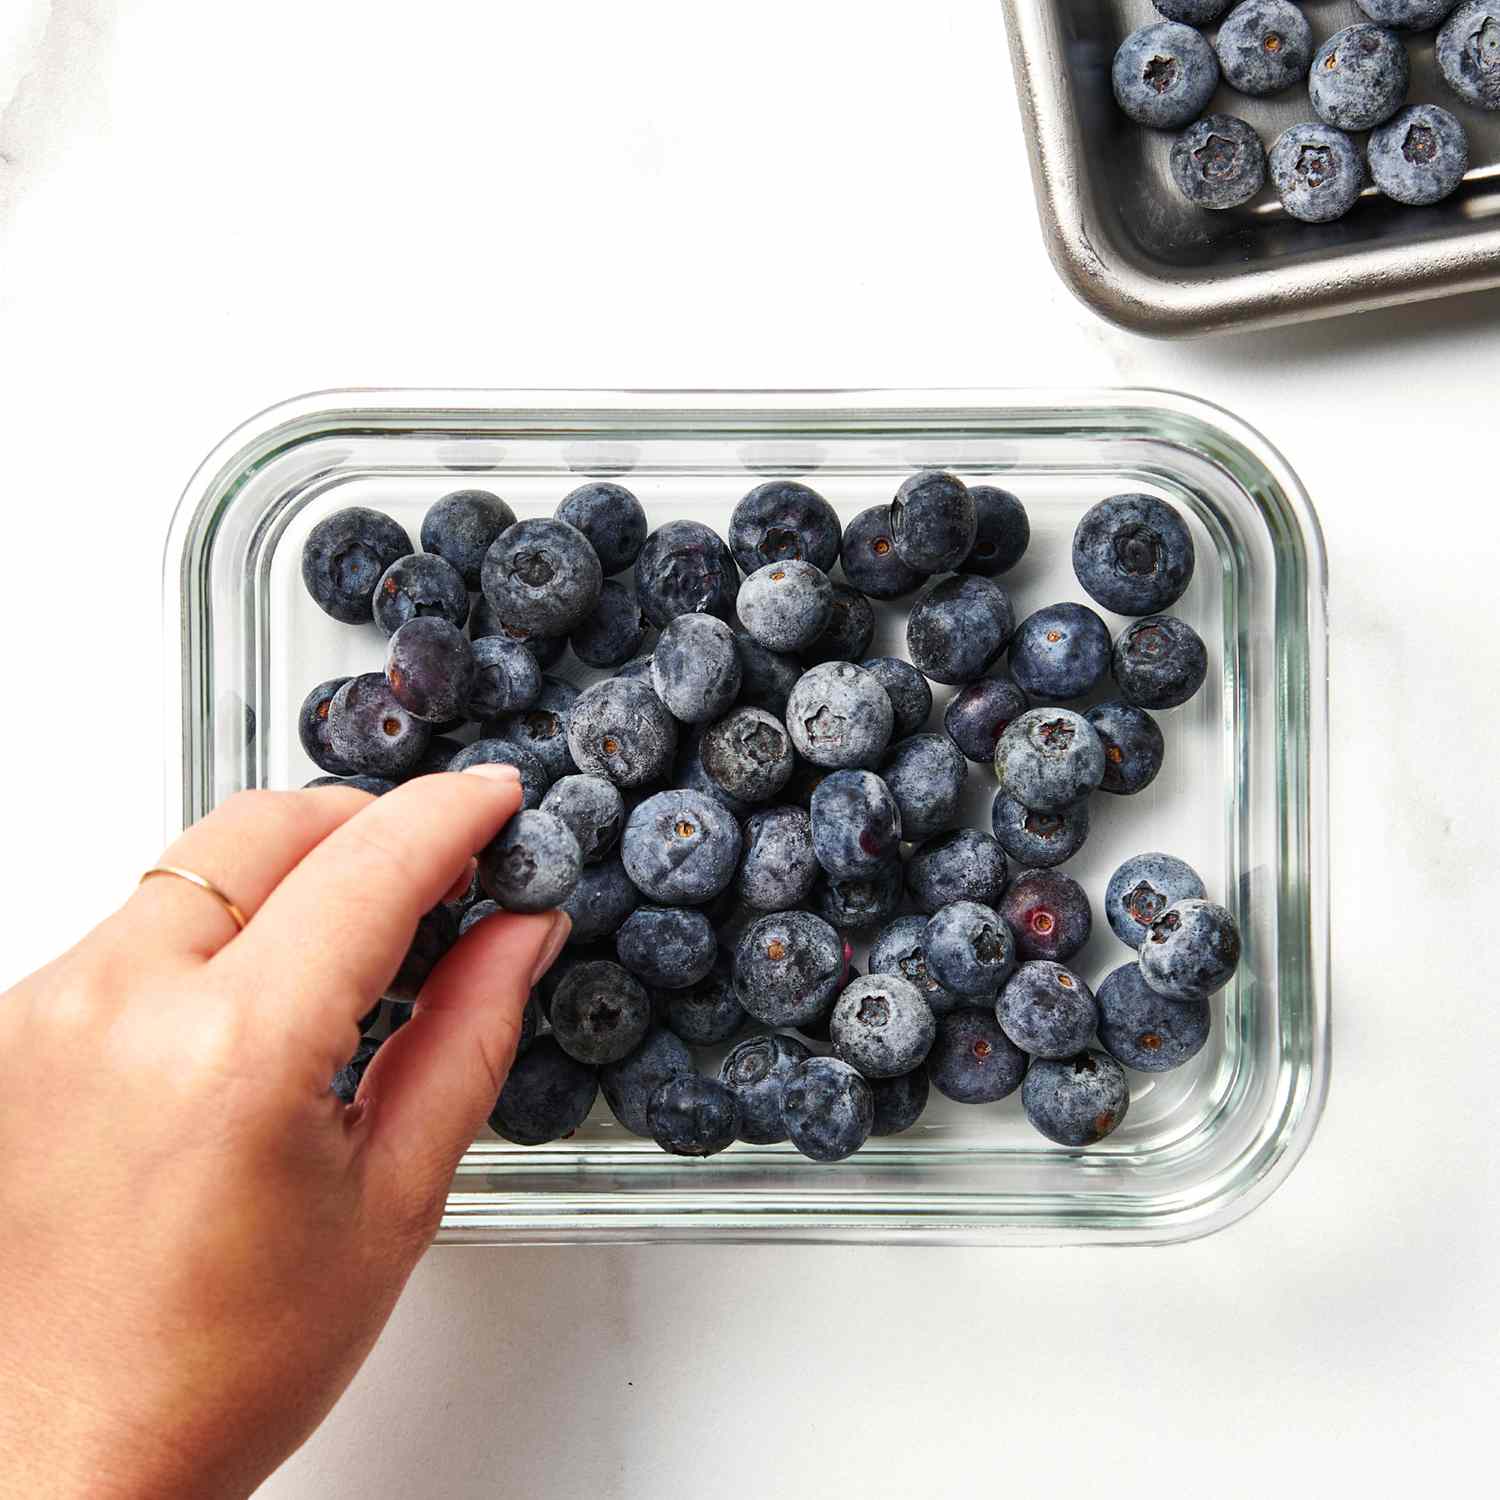 a hand placing a blueberry in a glass Tupperware